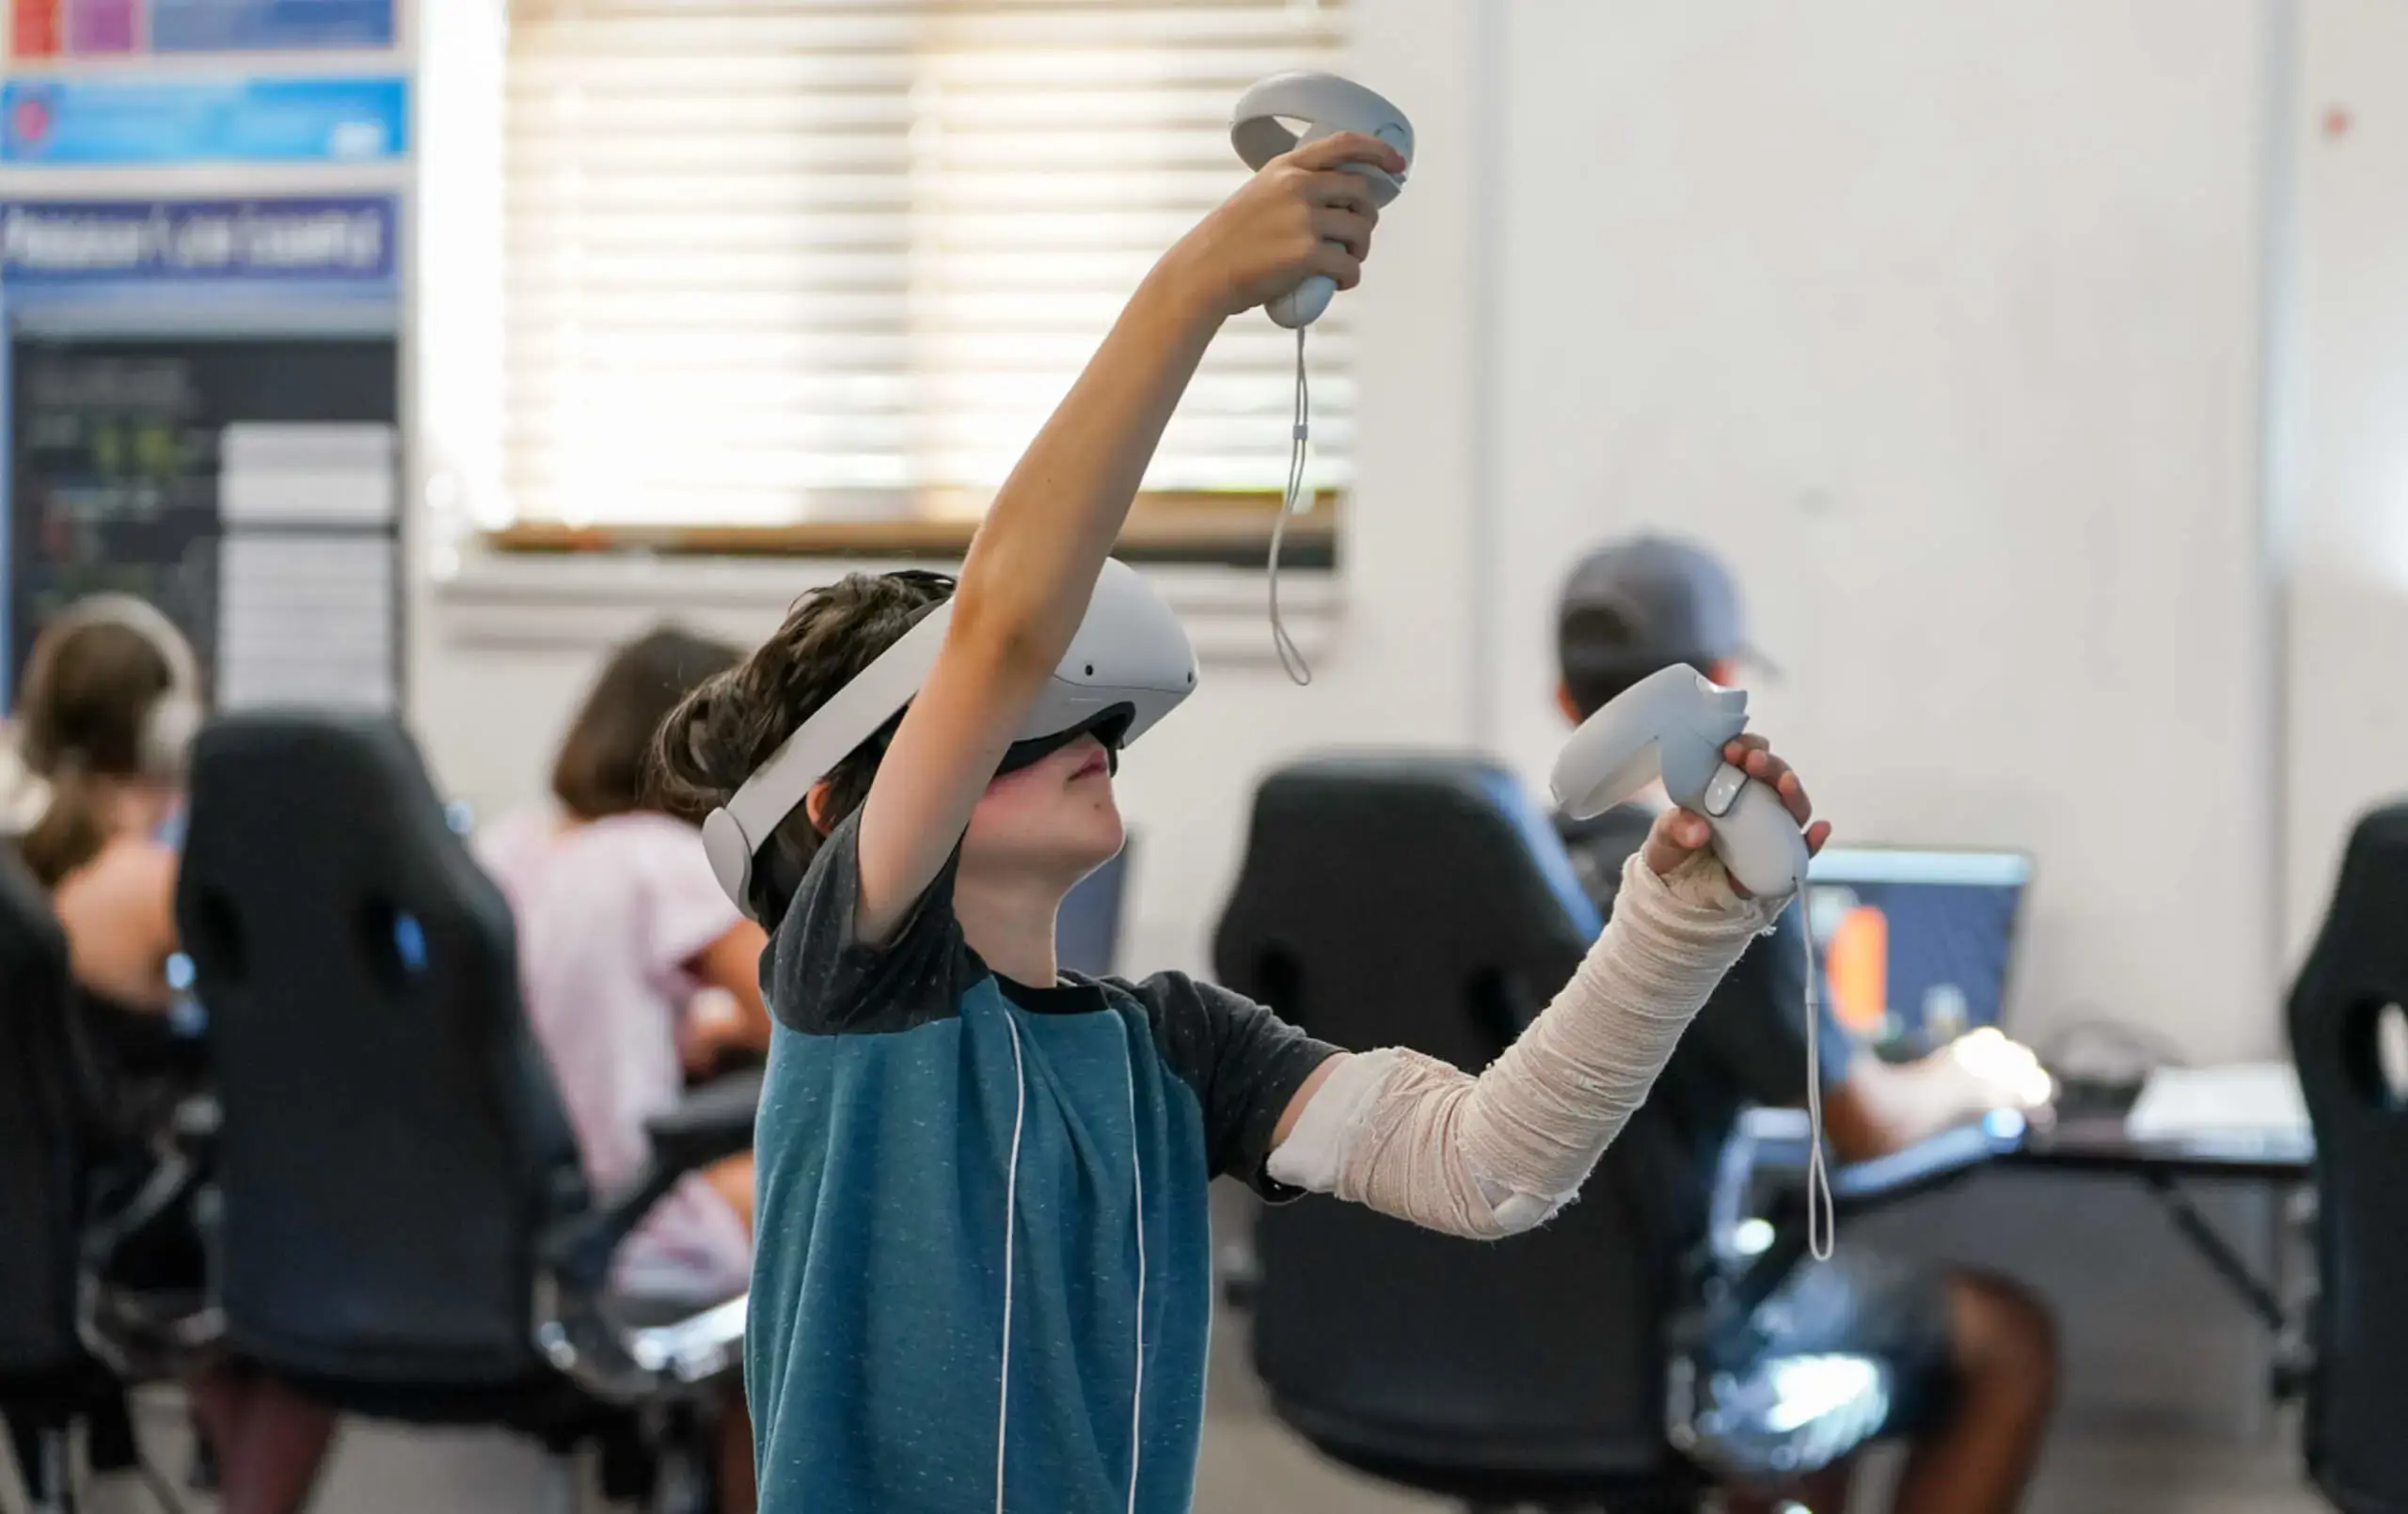 Camp Cyclone student explores with VR headset